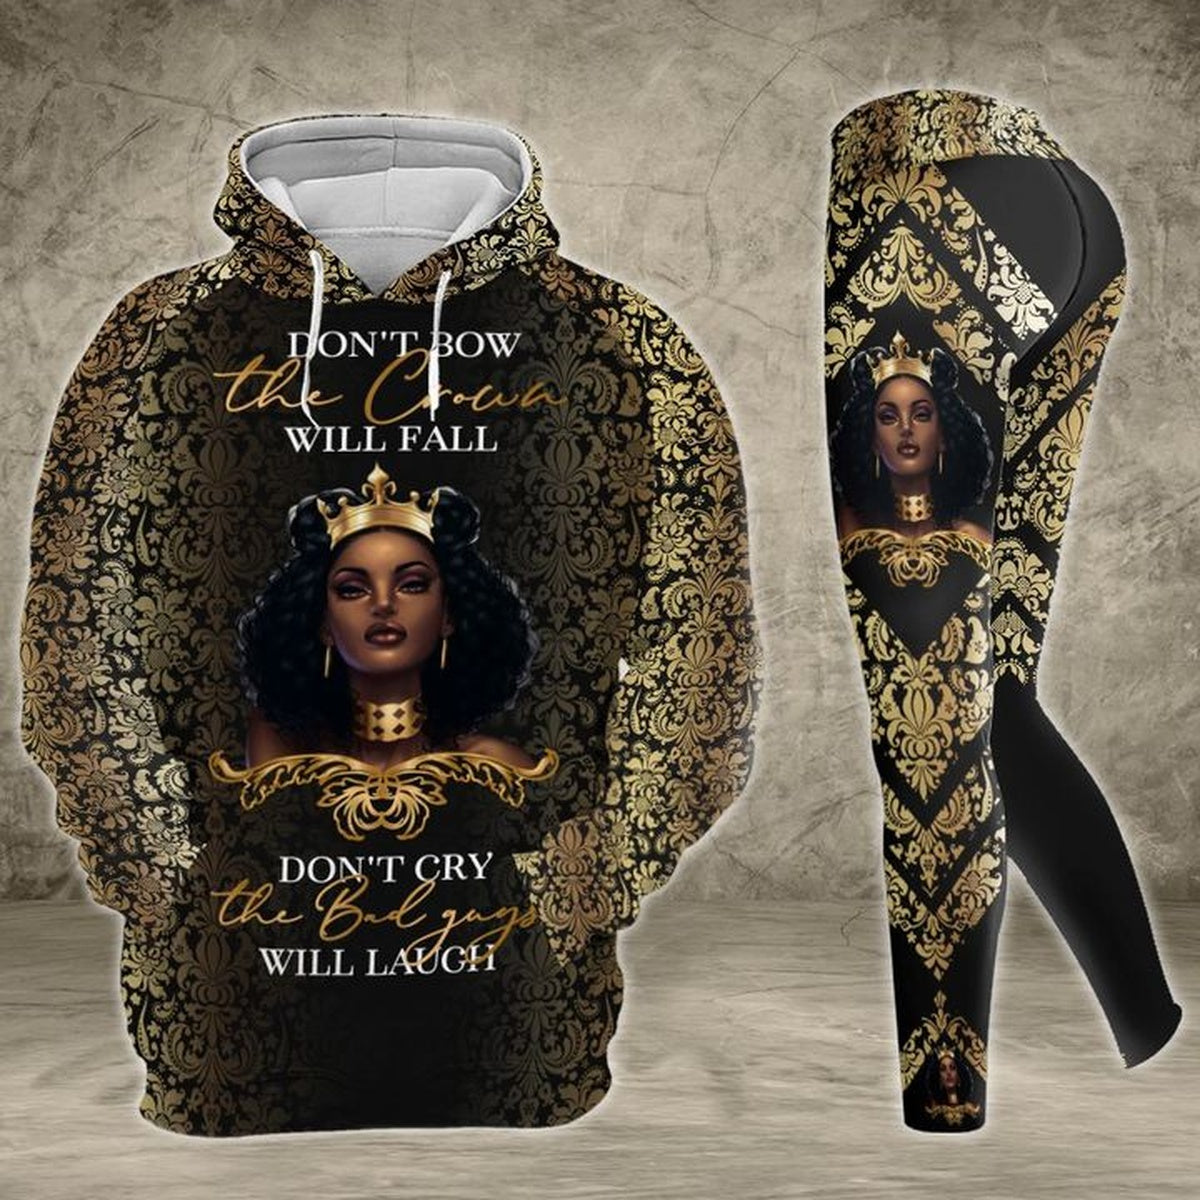 Beautiful Black Girl Dont Bow The Crown Will Wall Legging Hoodie , African Legging Hoodie